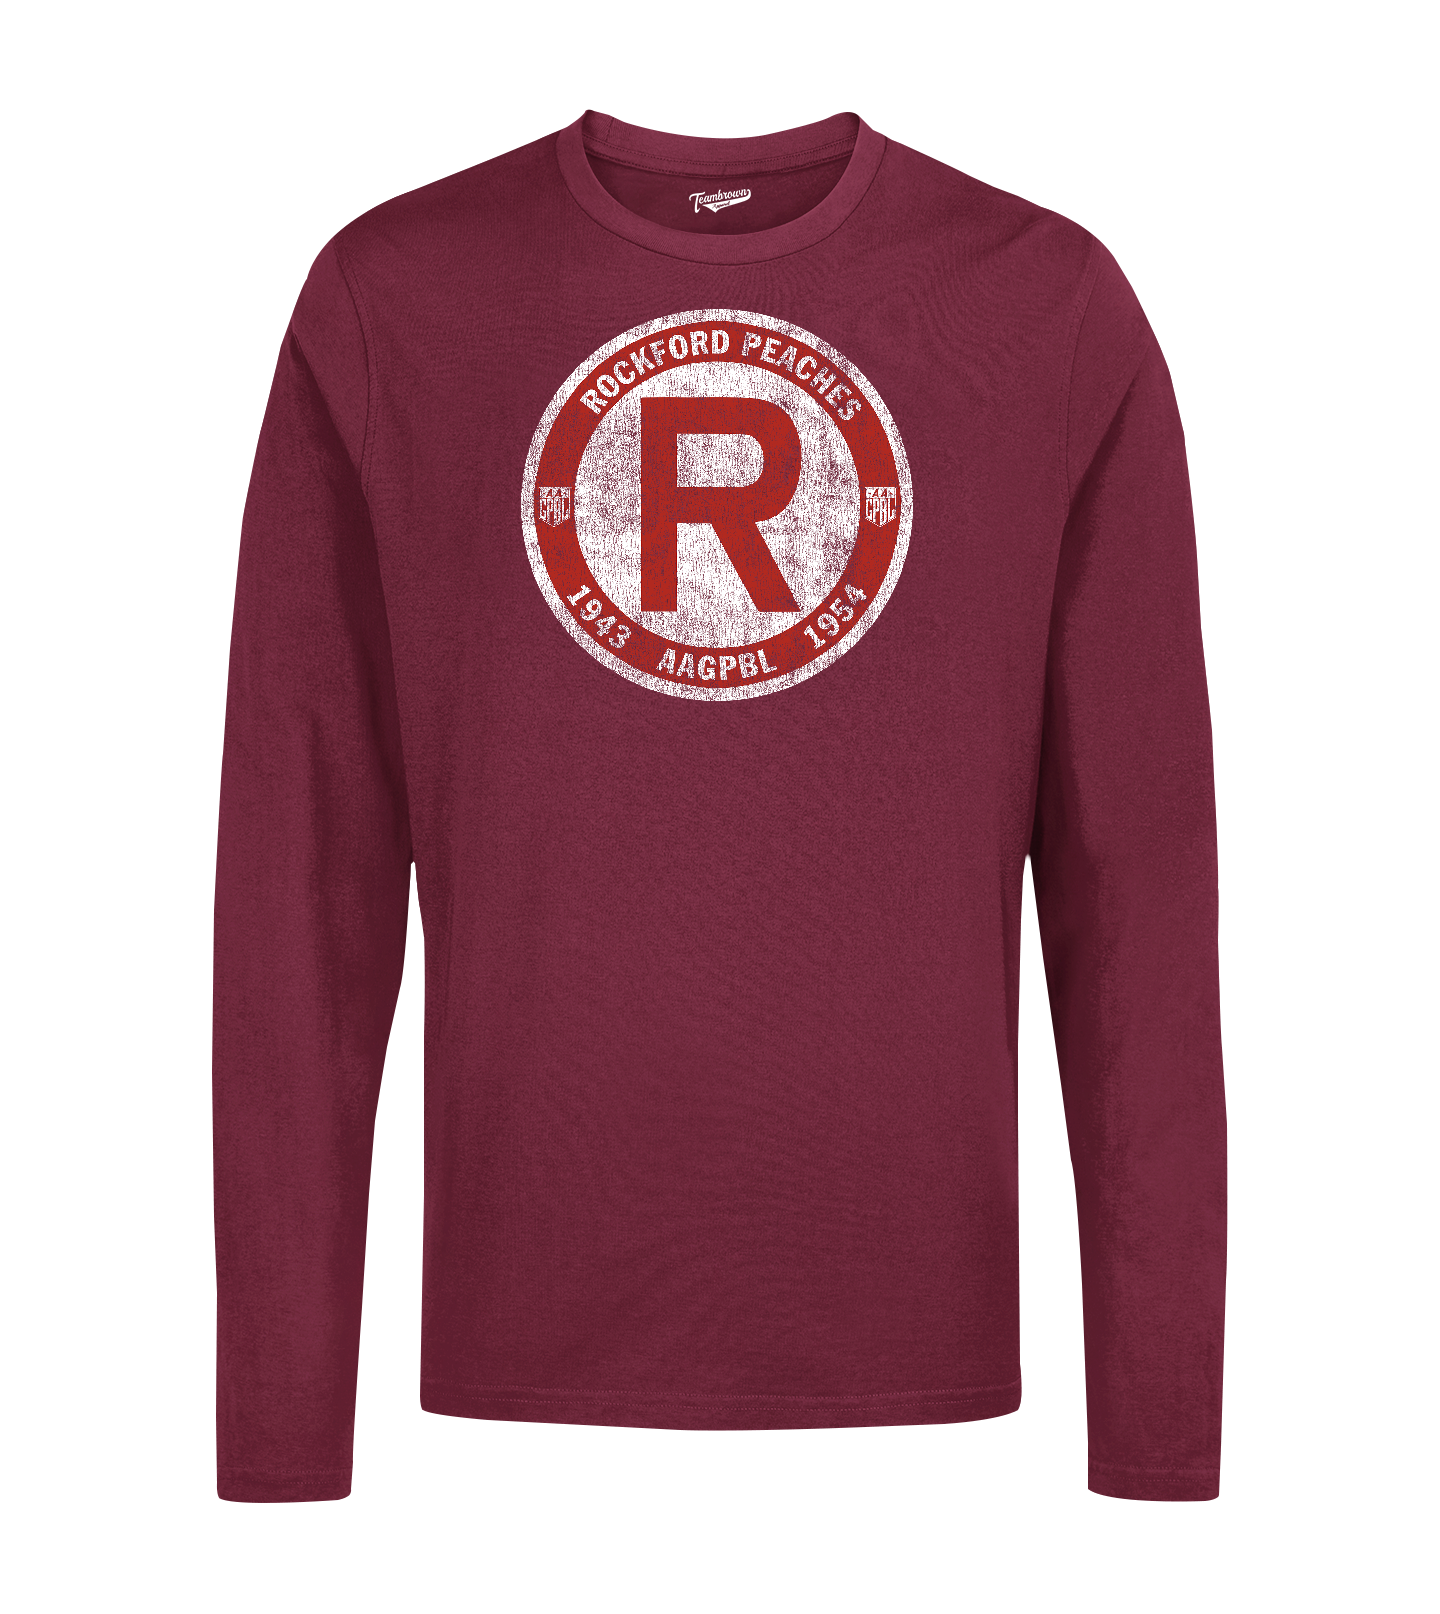 Rockford Peaches '43-'54 - Unisex Long Sleeve Crew T-Shirt | Officially Licensed - AAGPBL